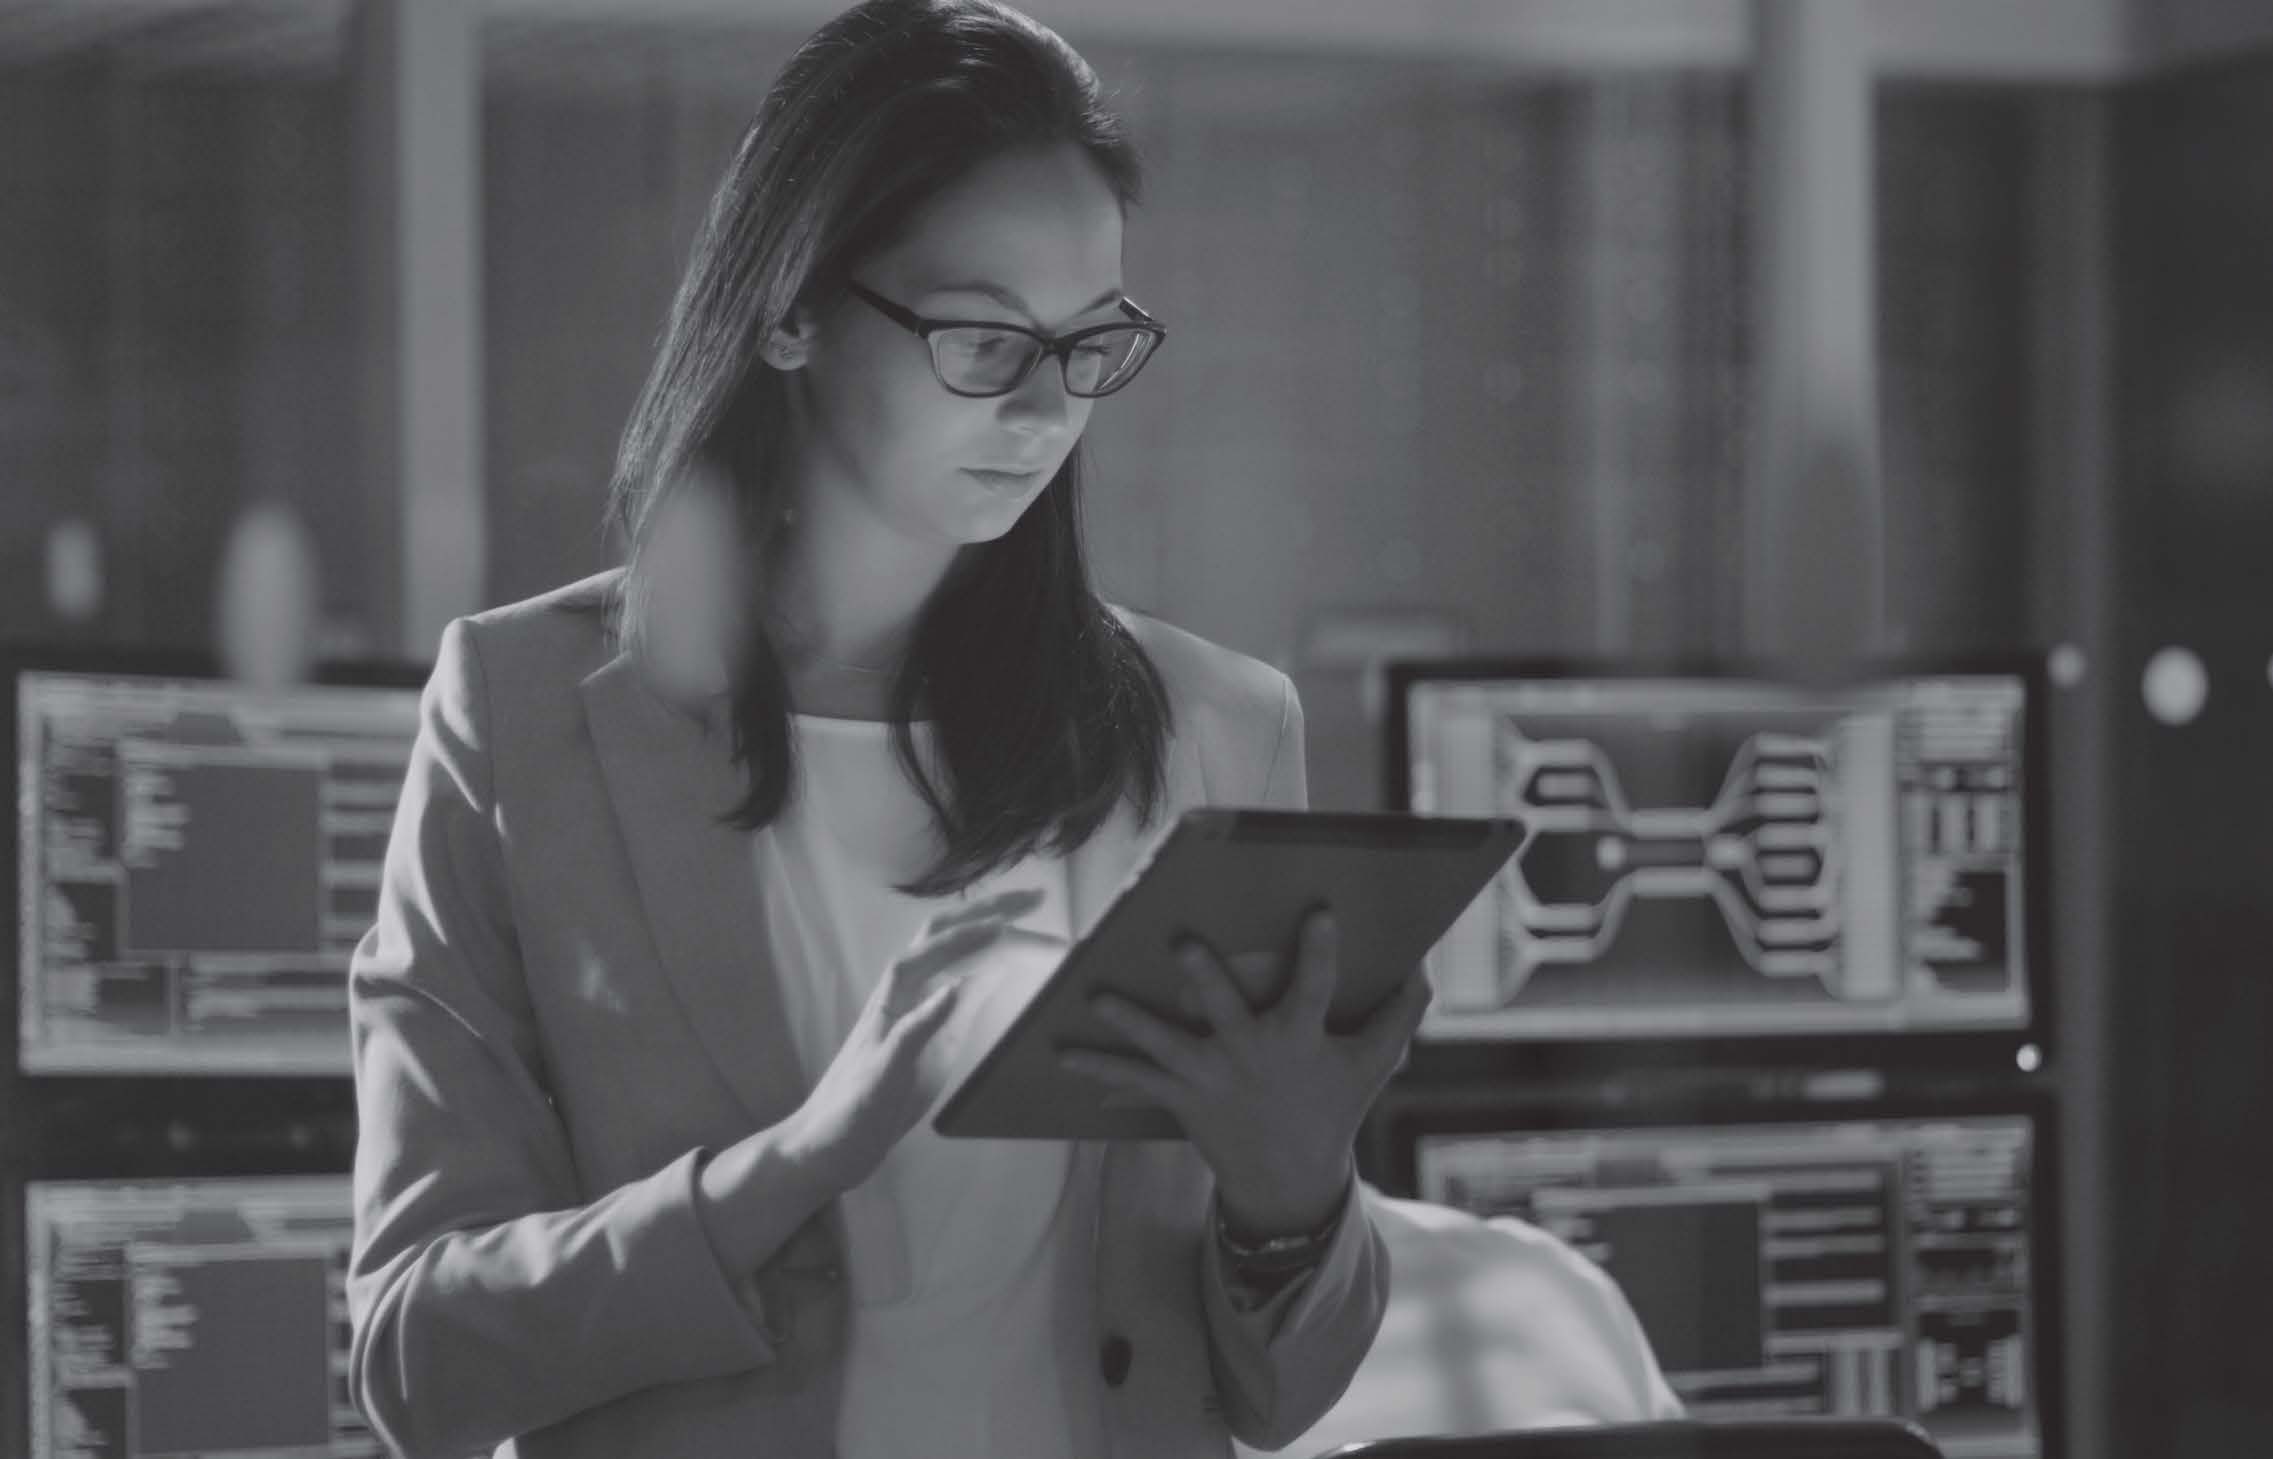 Grayscale photo of woman holding tablet computer